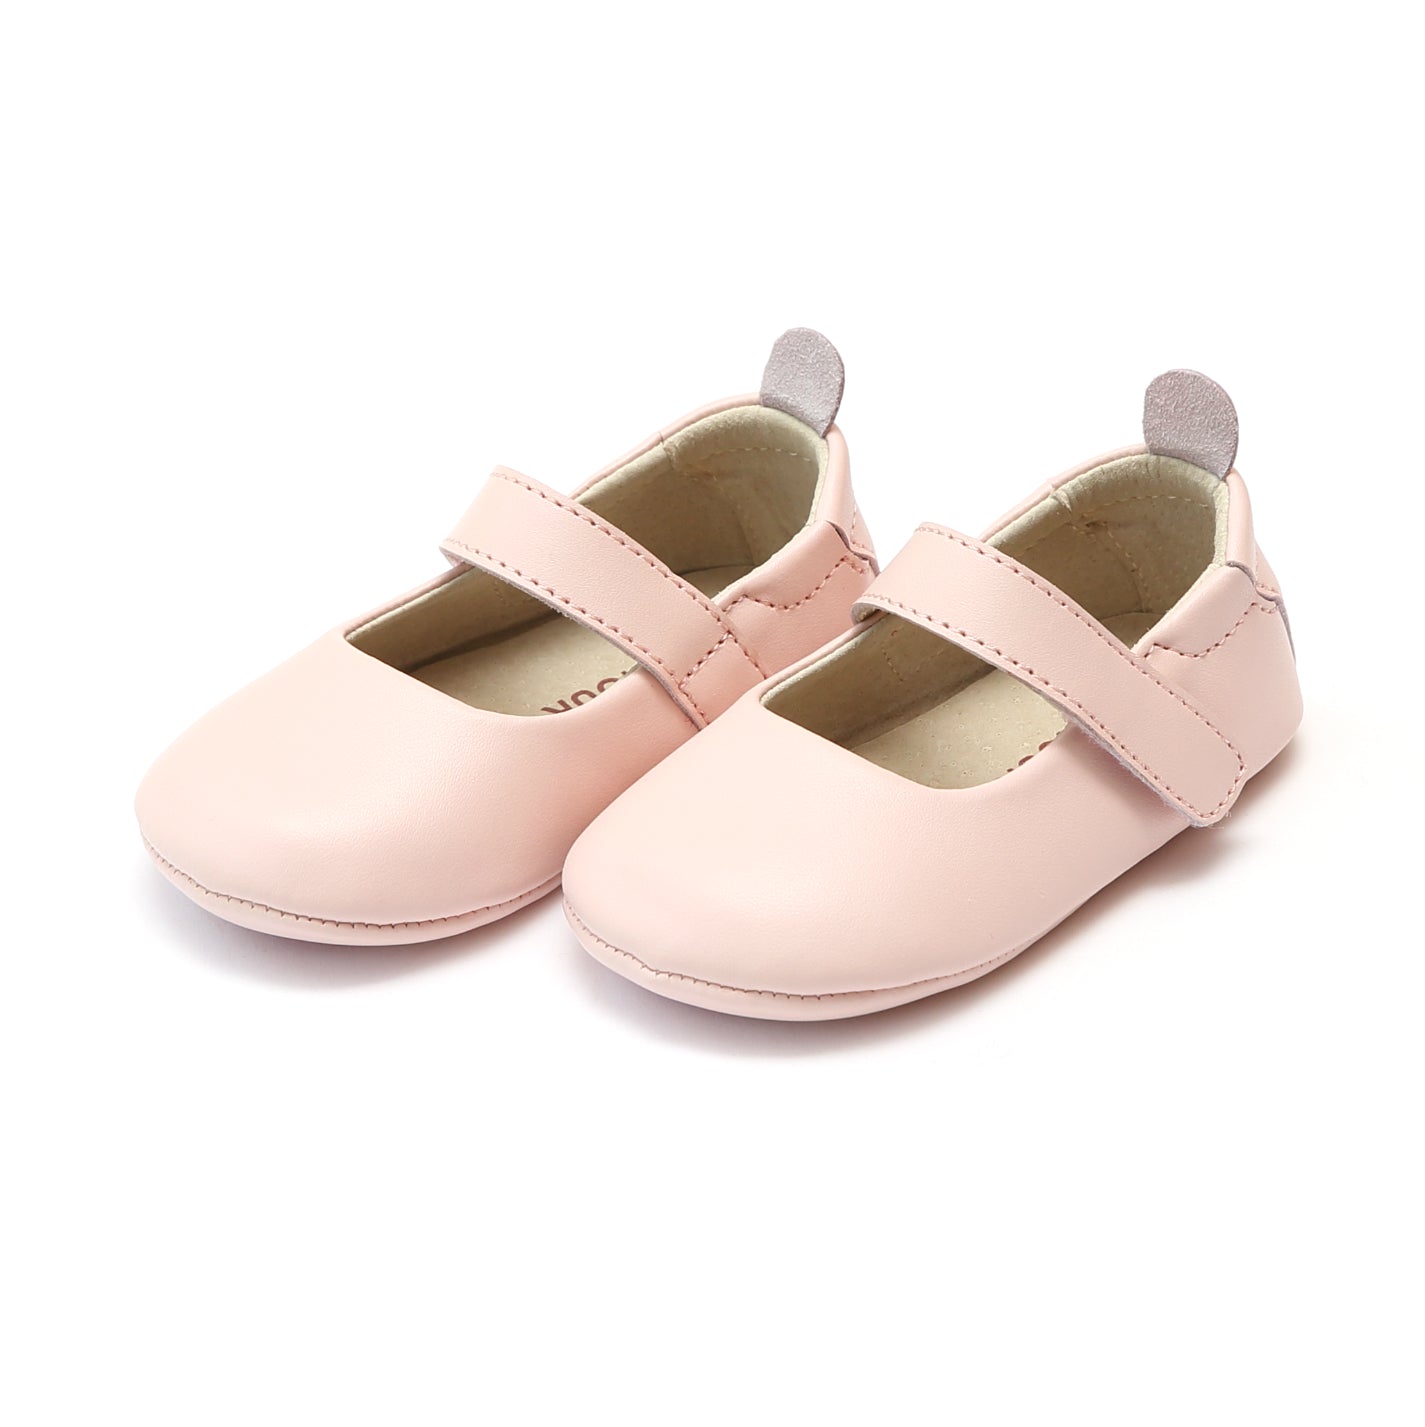 leather crib shoes